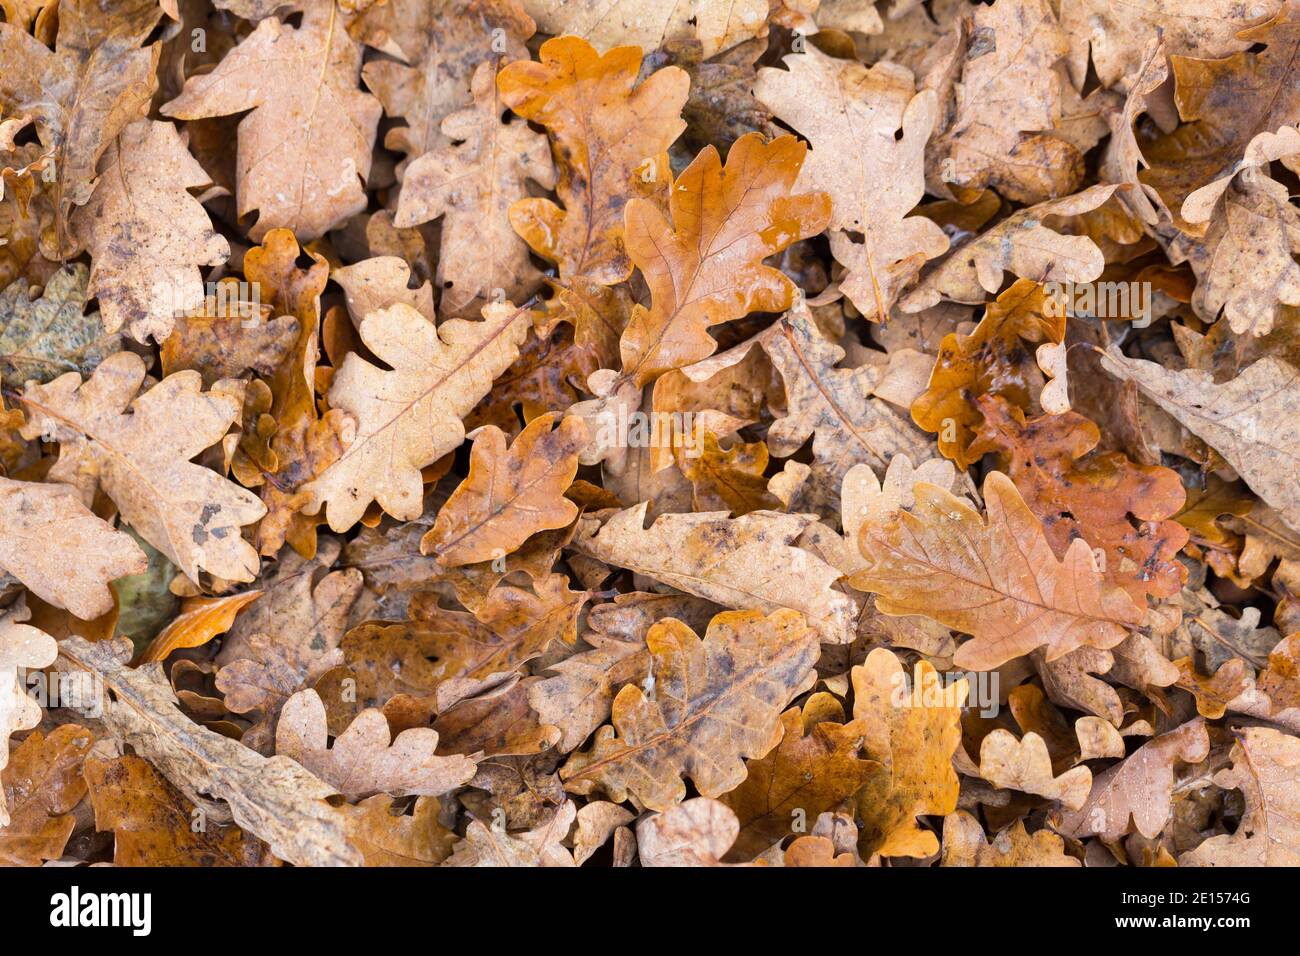 Oak leaves on the ground. Autumn foilage with different shades of brown. Symbol for fall. Stock Photo